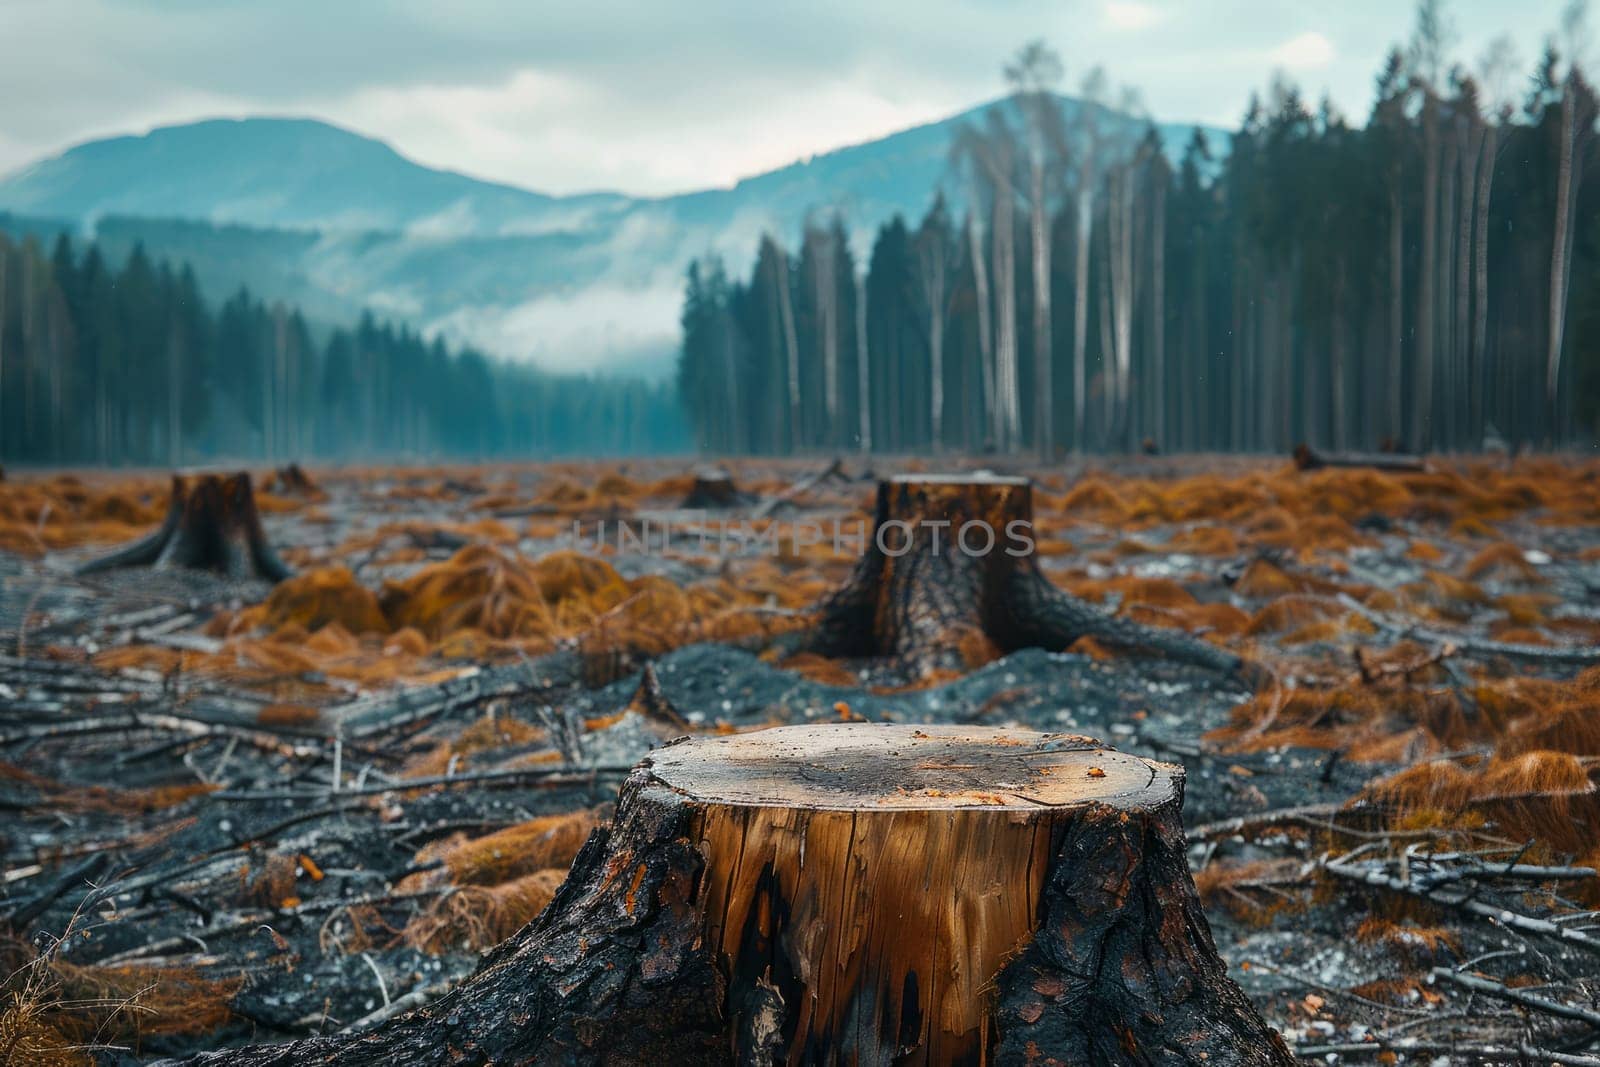 Deforested landscape with tree stumps in misty mountain forest, environmental destruction and deforestation concept